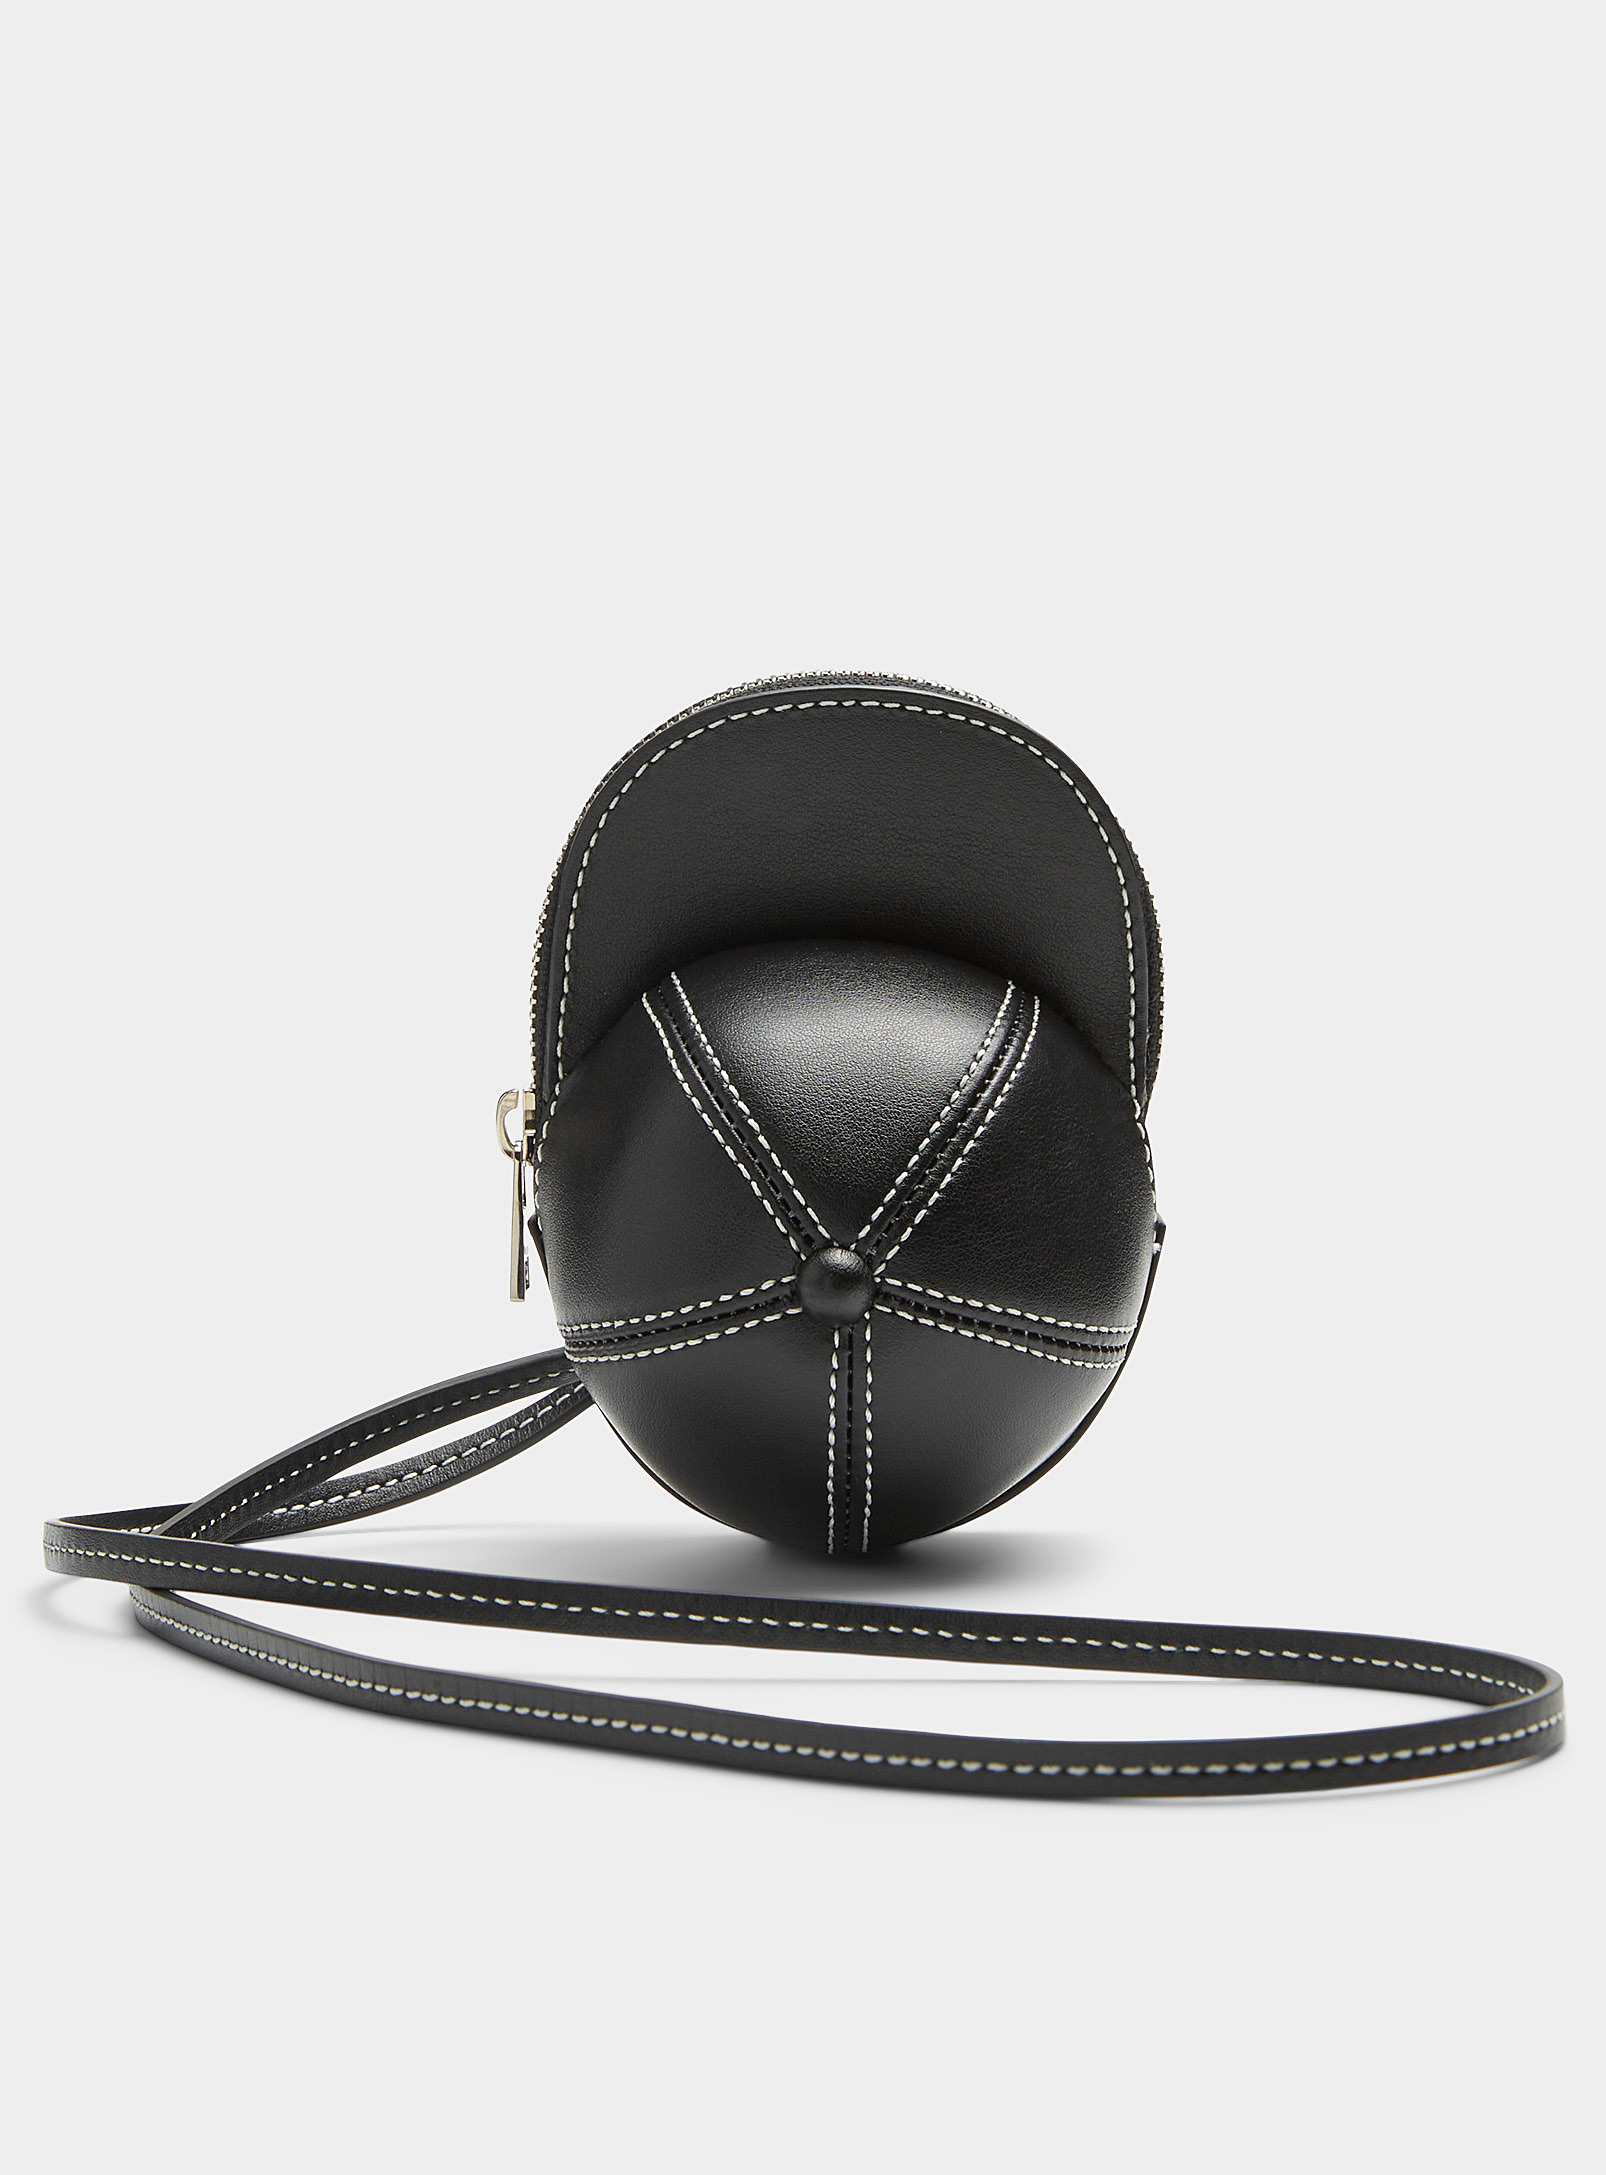 Jw Anderson Small Leather Cap Bag In Black